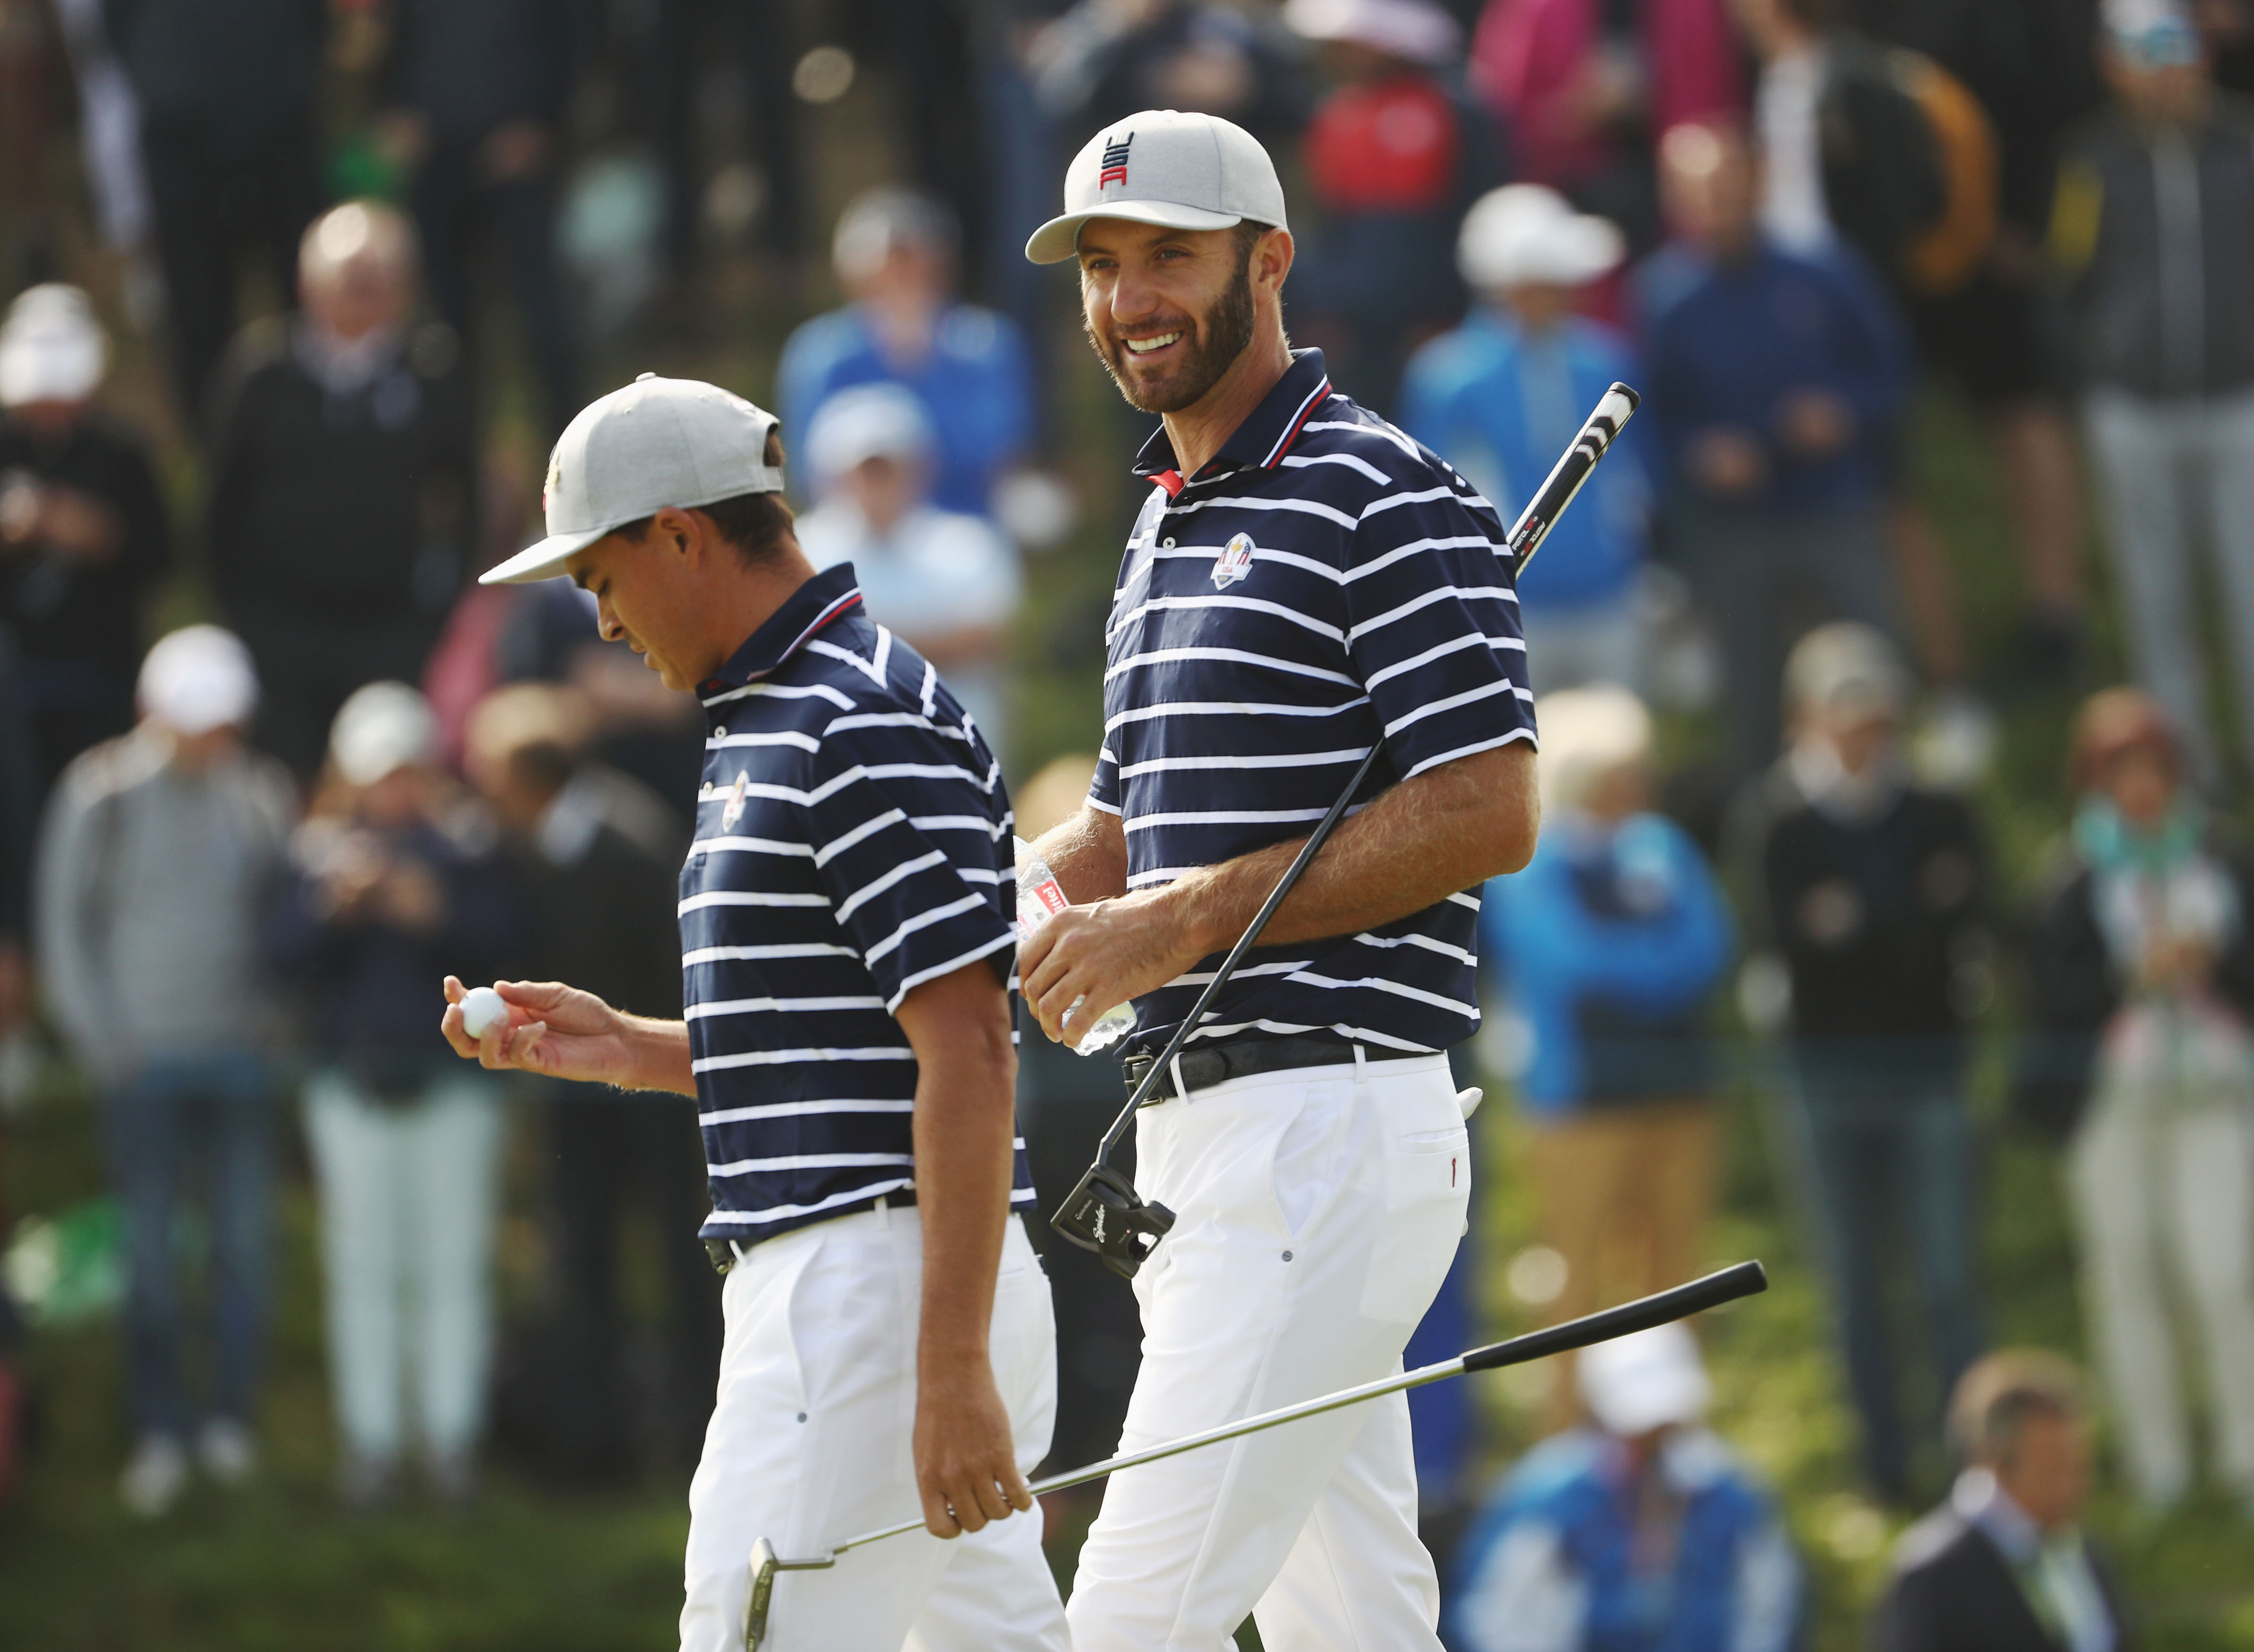 USA take early Ryder Cup lead after impressive fourballs performance